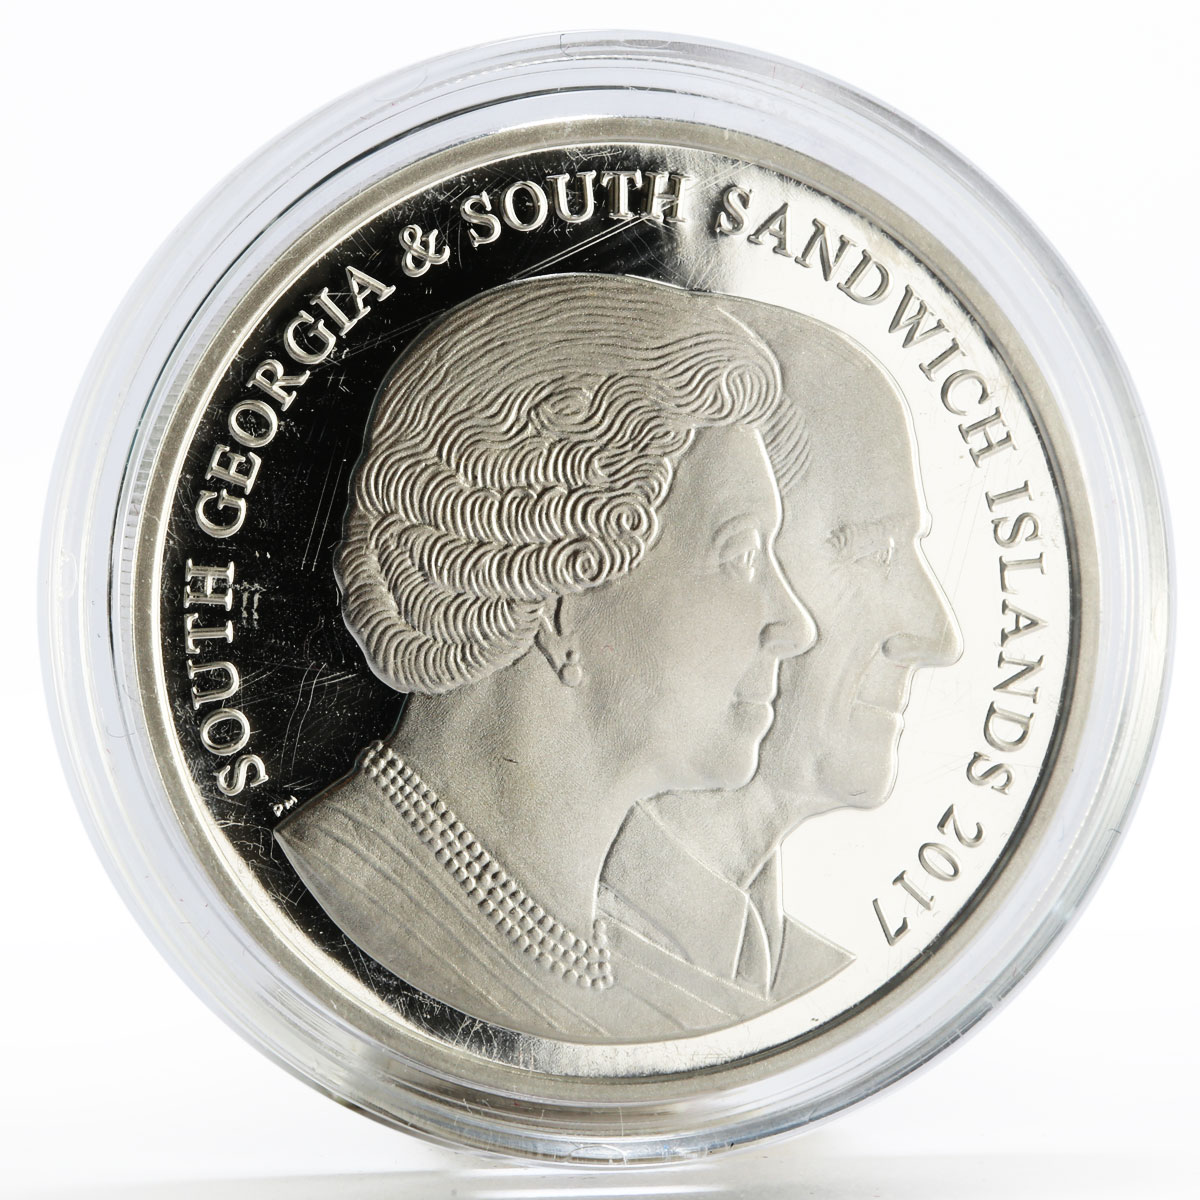 Sandwich Islands 2 pounds 70 Years of Marriage of Prince Philip silver coin 2017